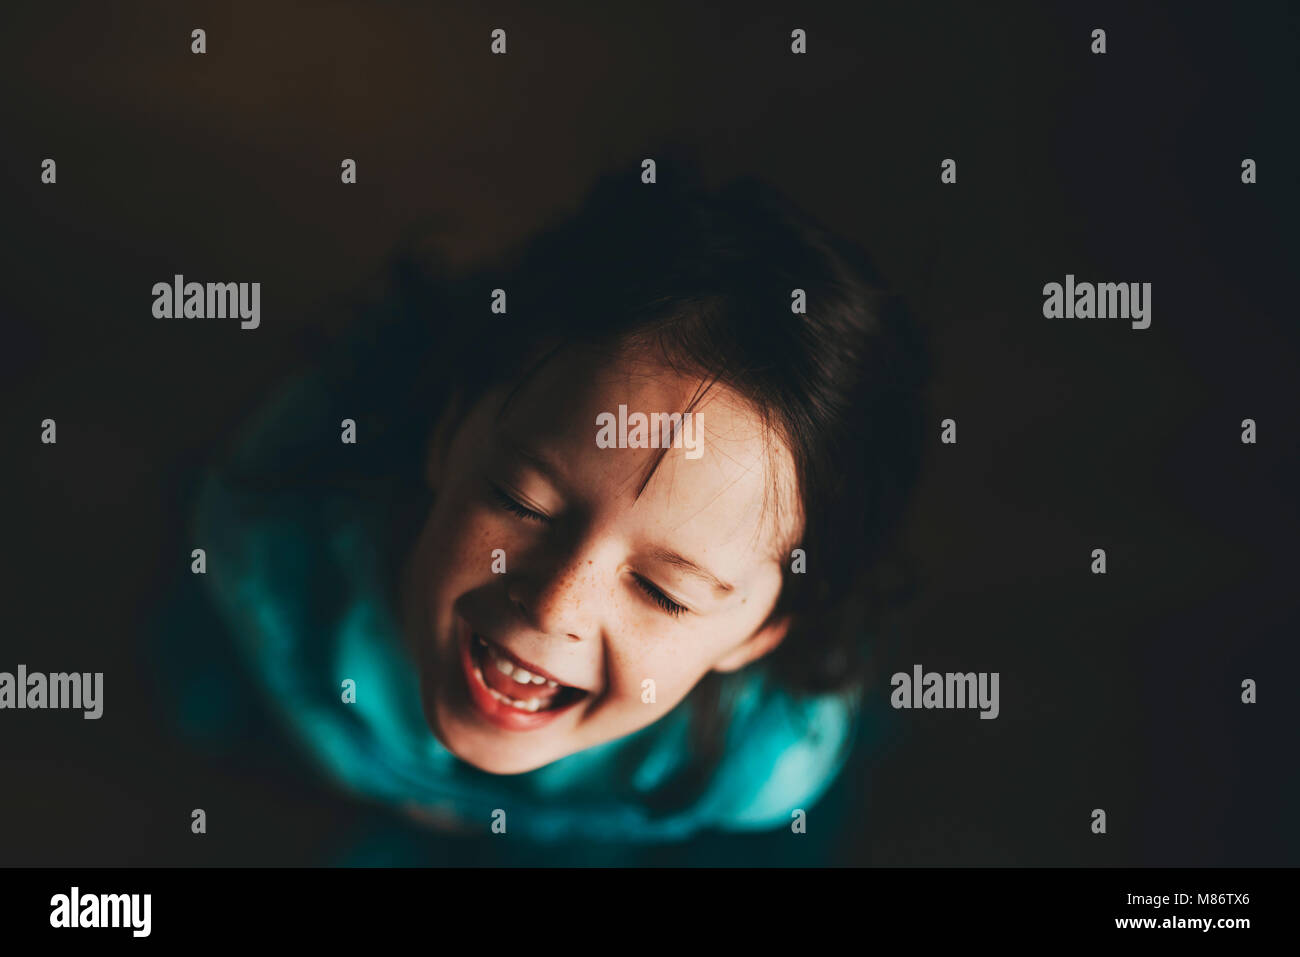 Overhead of young girl laughing Stock Photo